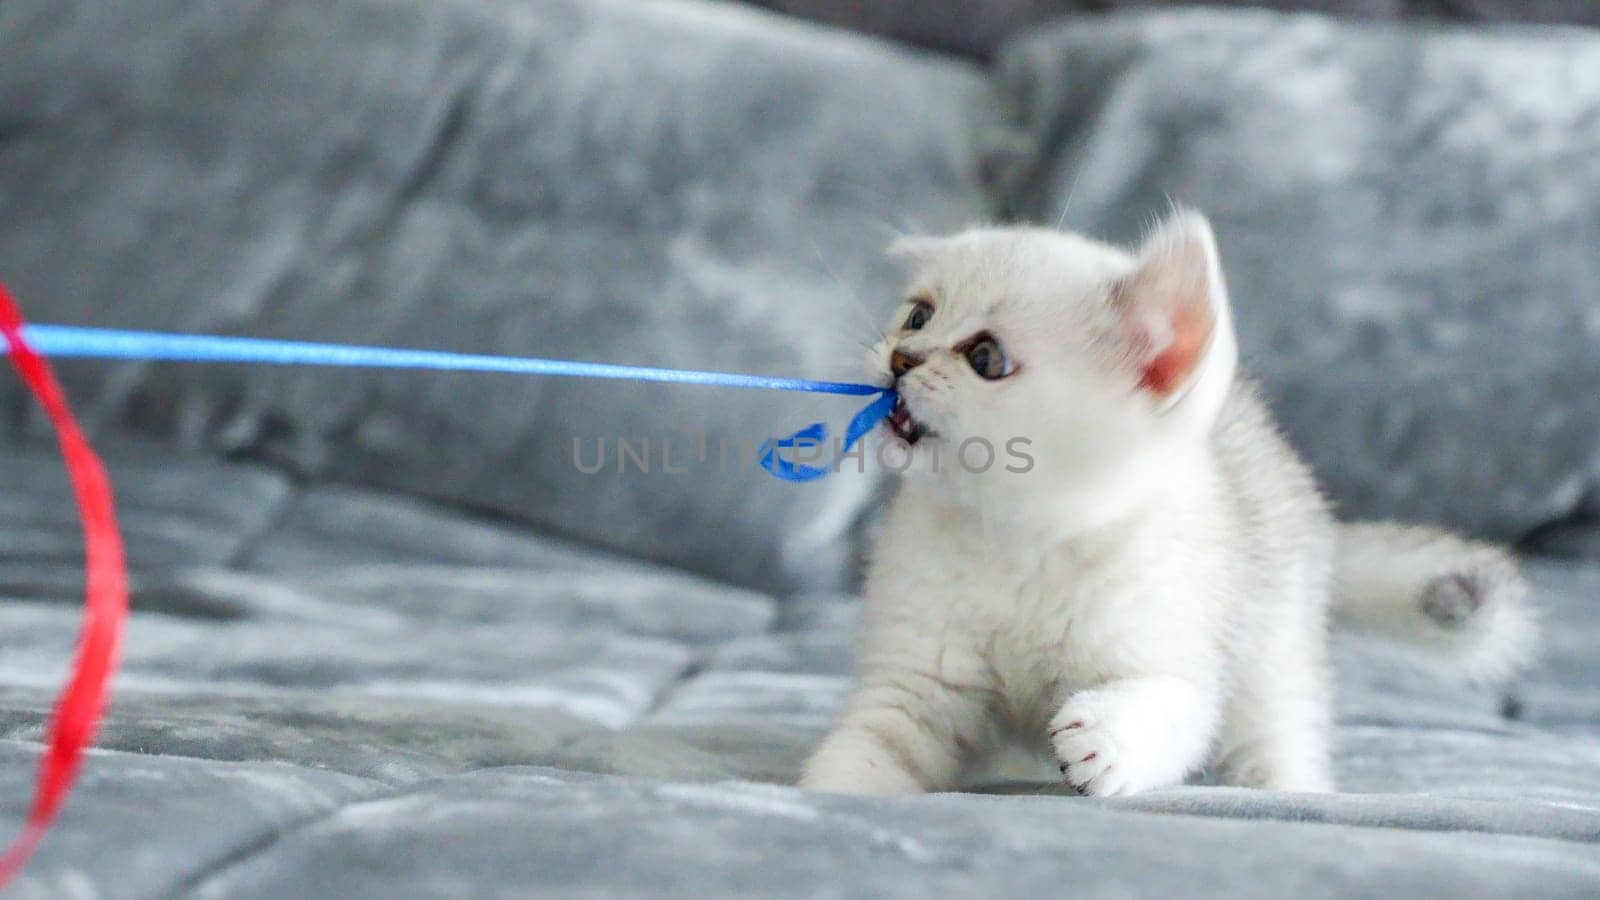 Fluffy white Scottish kitten is playing with colorful ribbons, front view, space for text. Cute young British shorthair white cat with brown eyes. by JuliaDorian